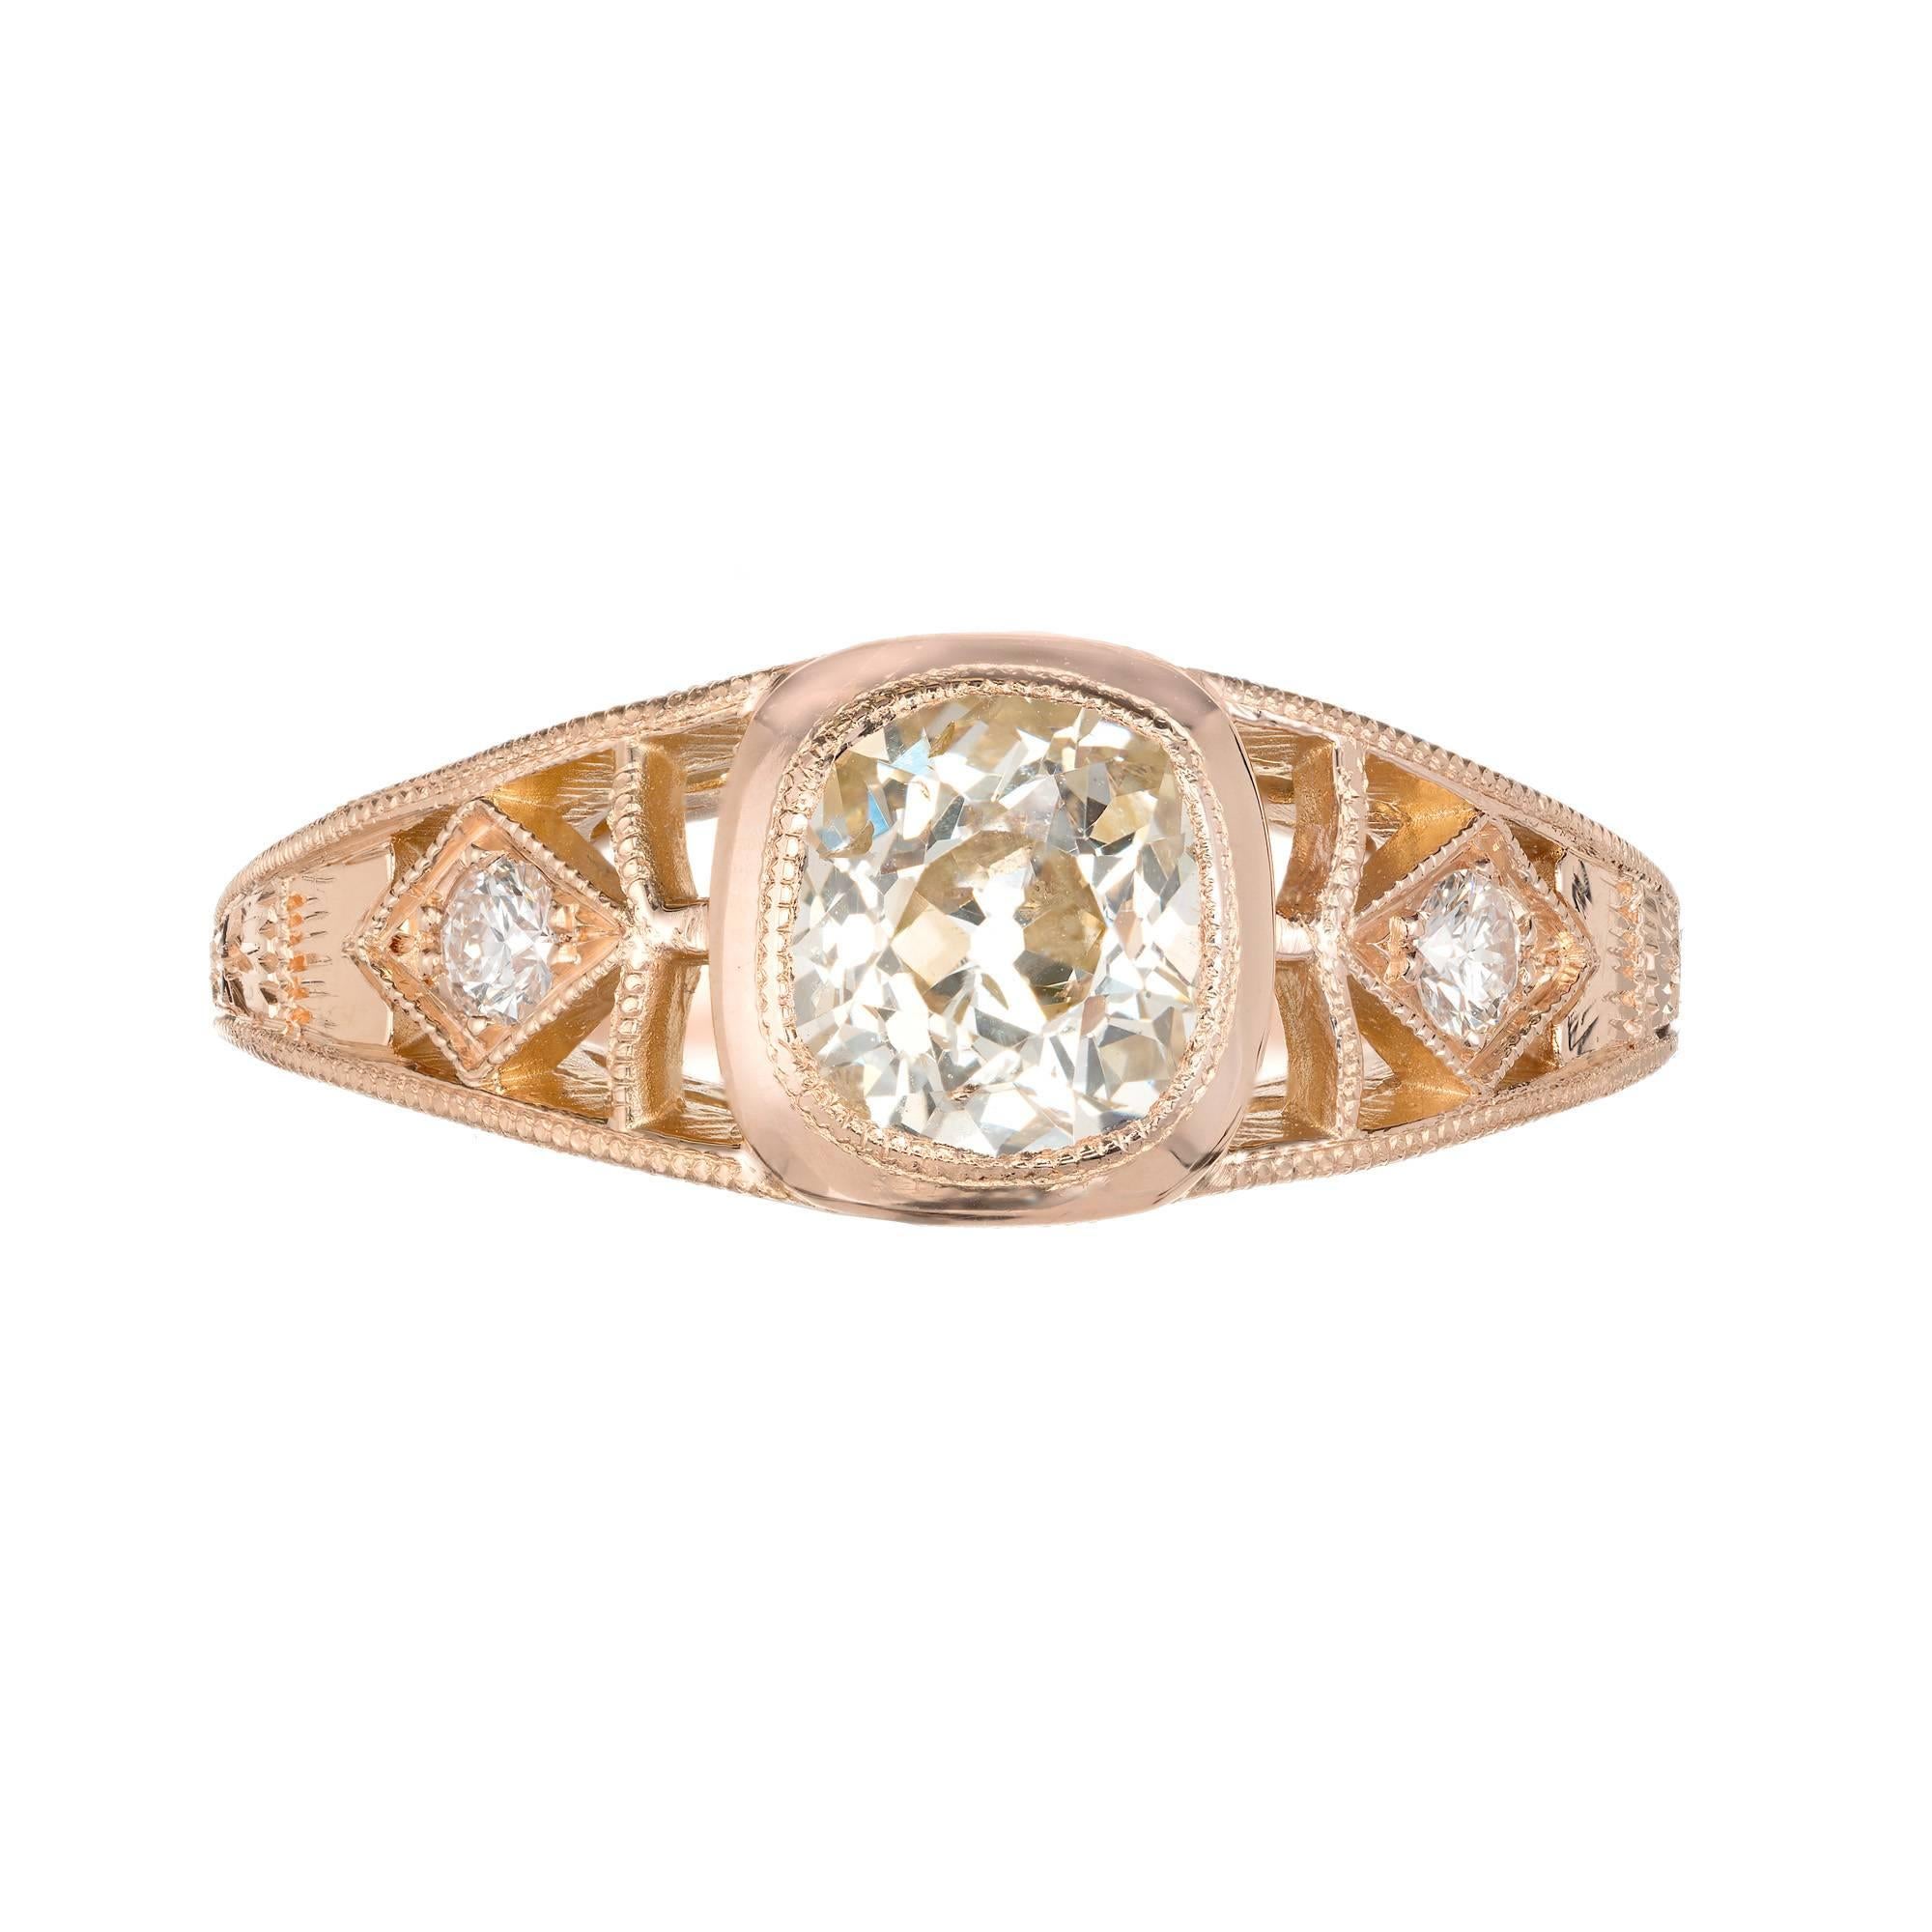 Peter Suchy 18k rose gold open filigree engagement ring with a 1.00ct old mine brilliant cut GIA certified diamond of warm soft light brown S to T color. The ring was made in our workshop using old world hand done detailing.  

1 old mine cushion